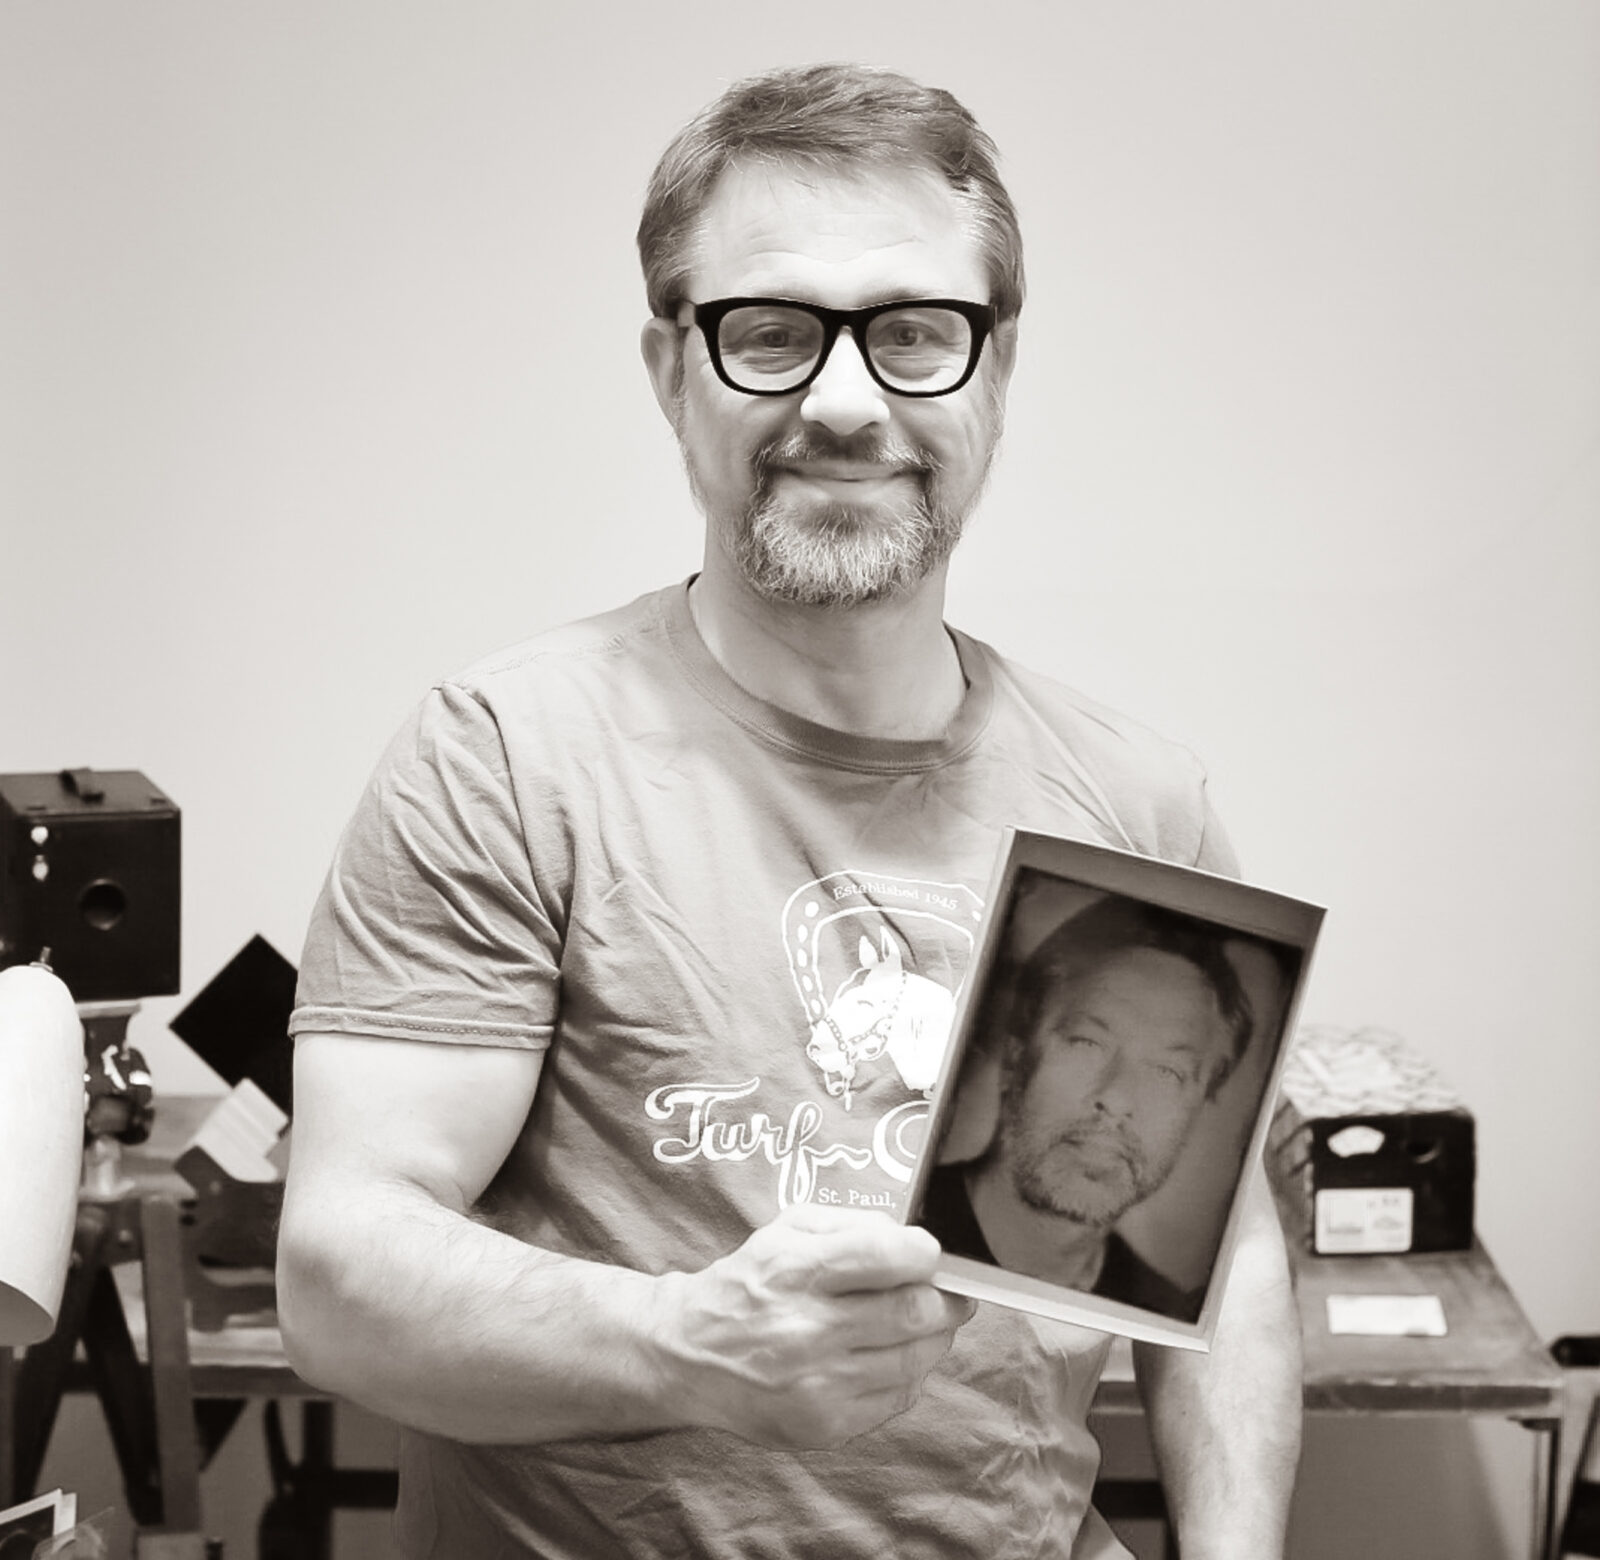 Man looking in the camera holding a tintype photograph of himself